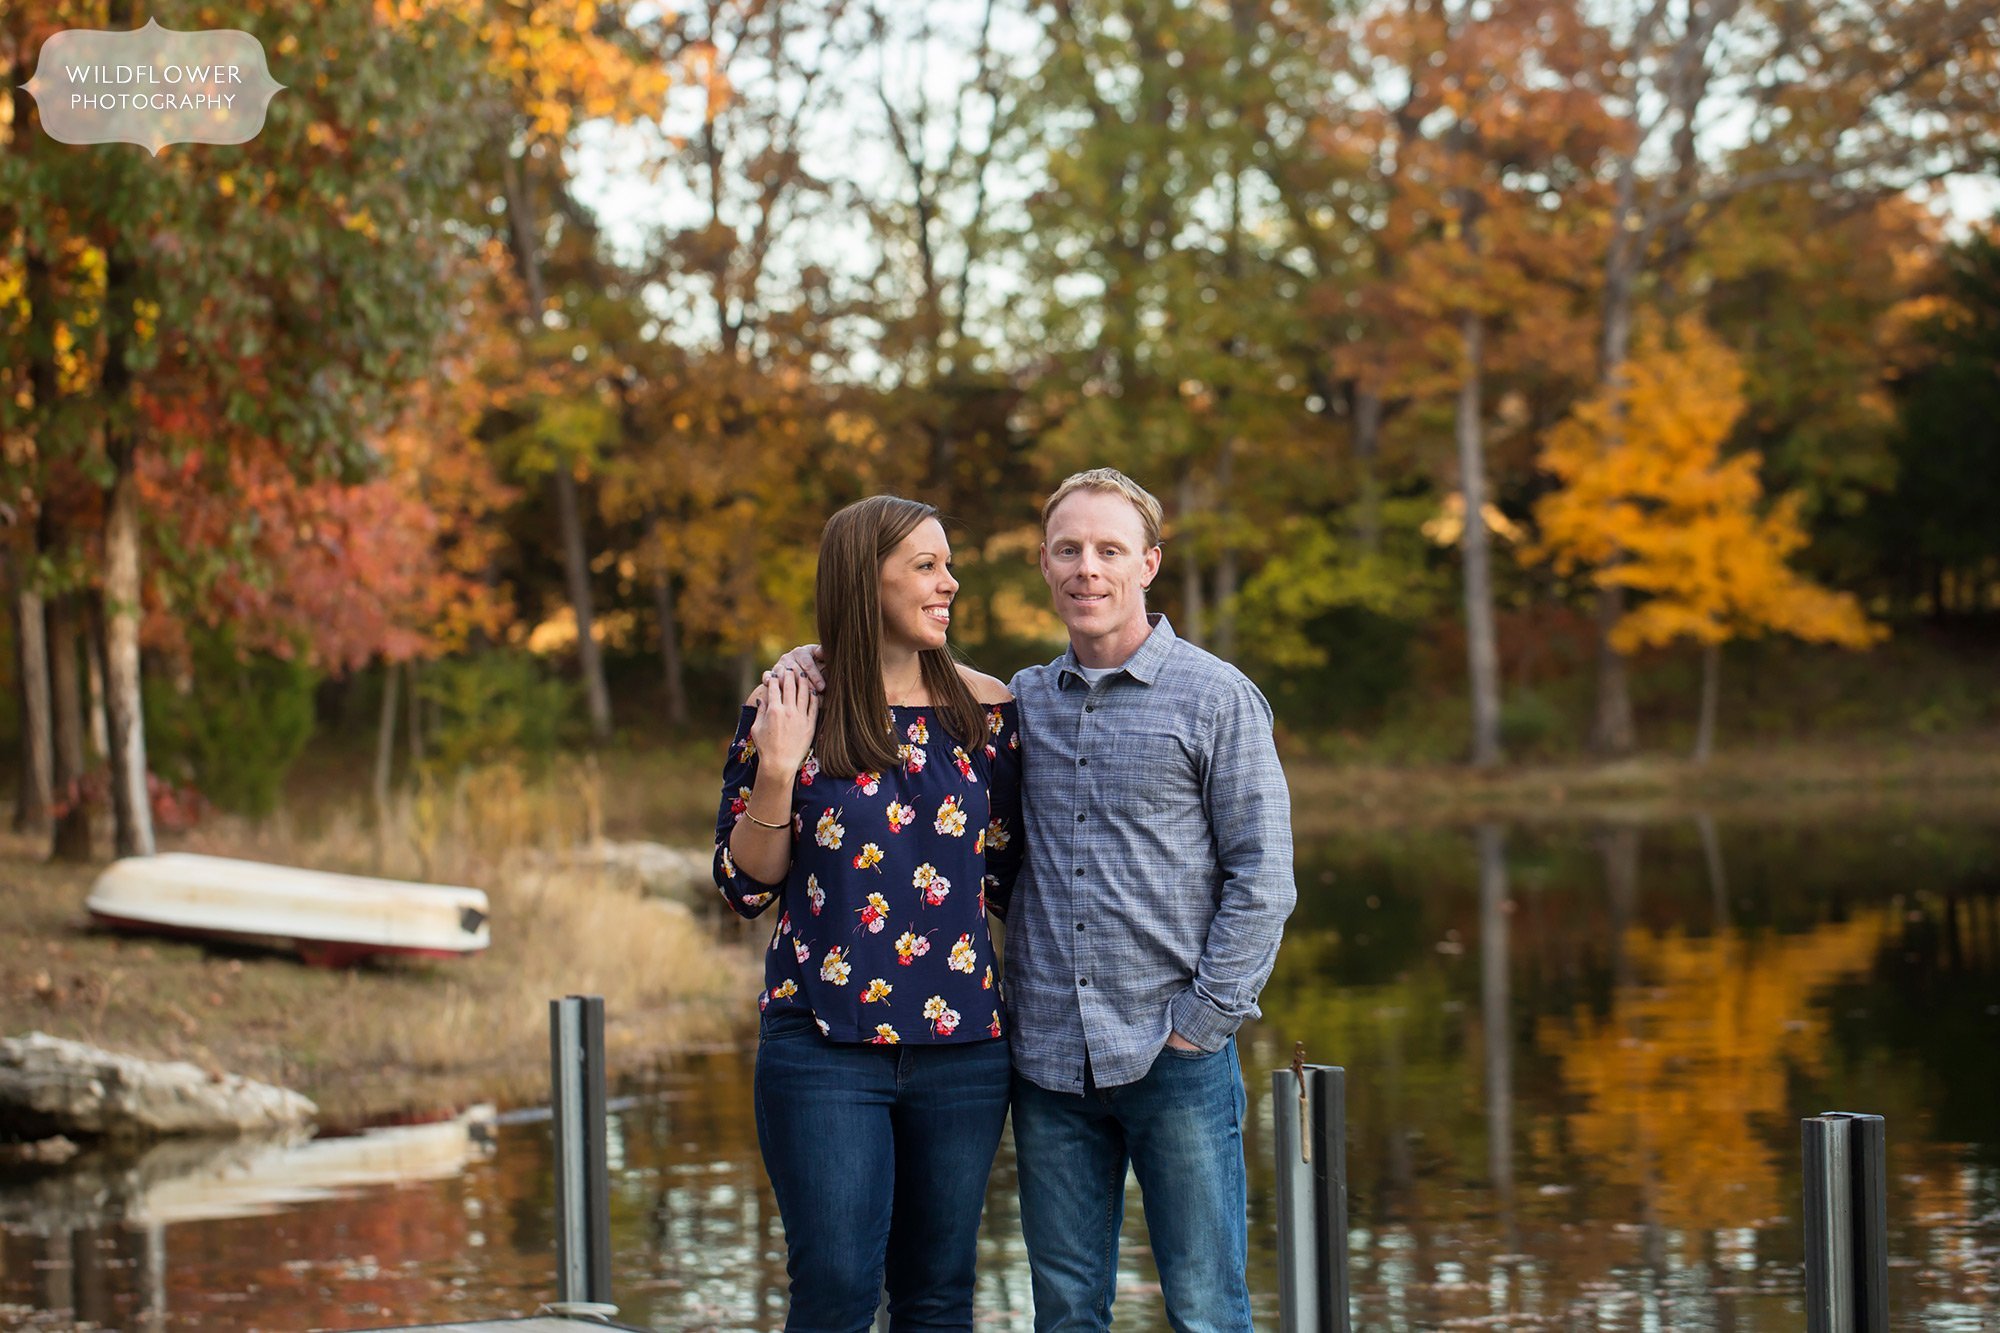 Parents pose by the lake for this October family portrait session.